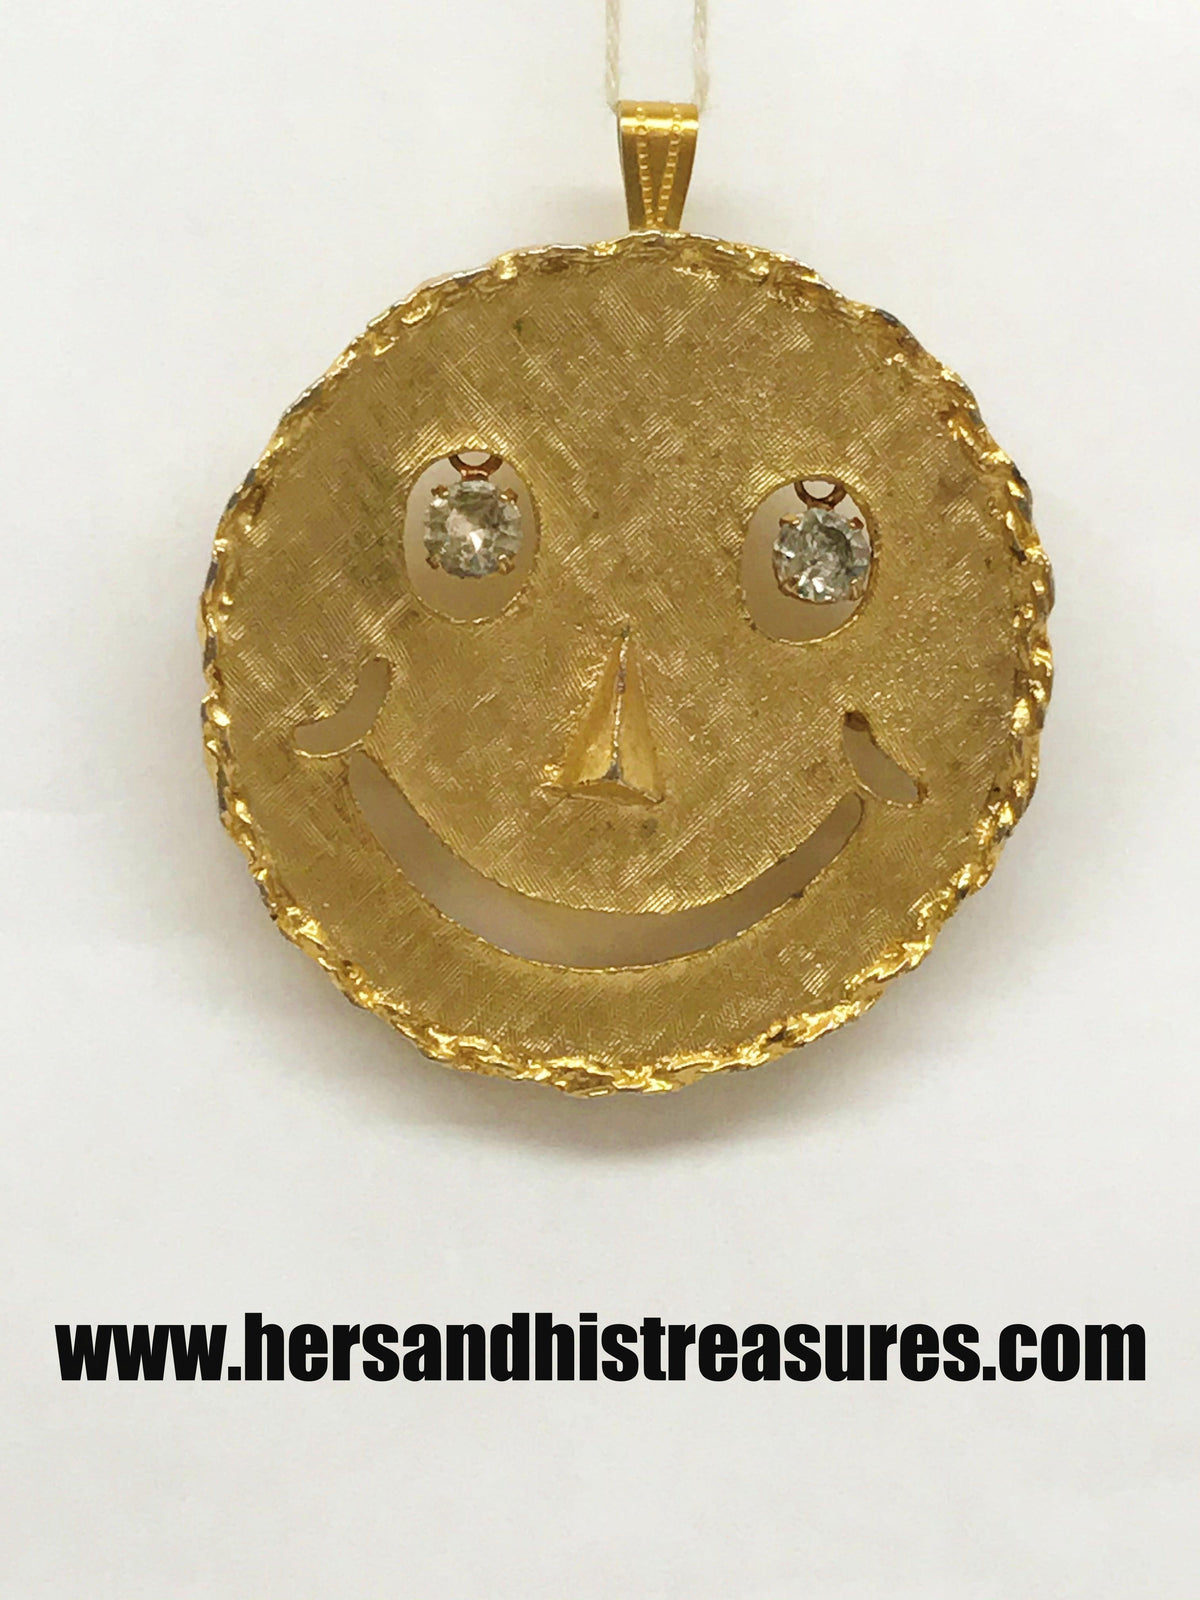 Vintage Gold Tone Smiley Face Necklace Pendant Or Brooch - Hers and His Treasures